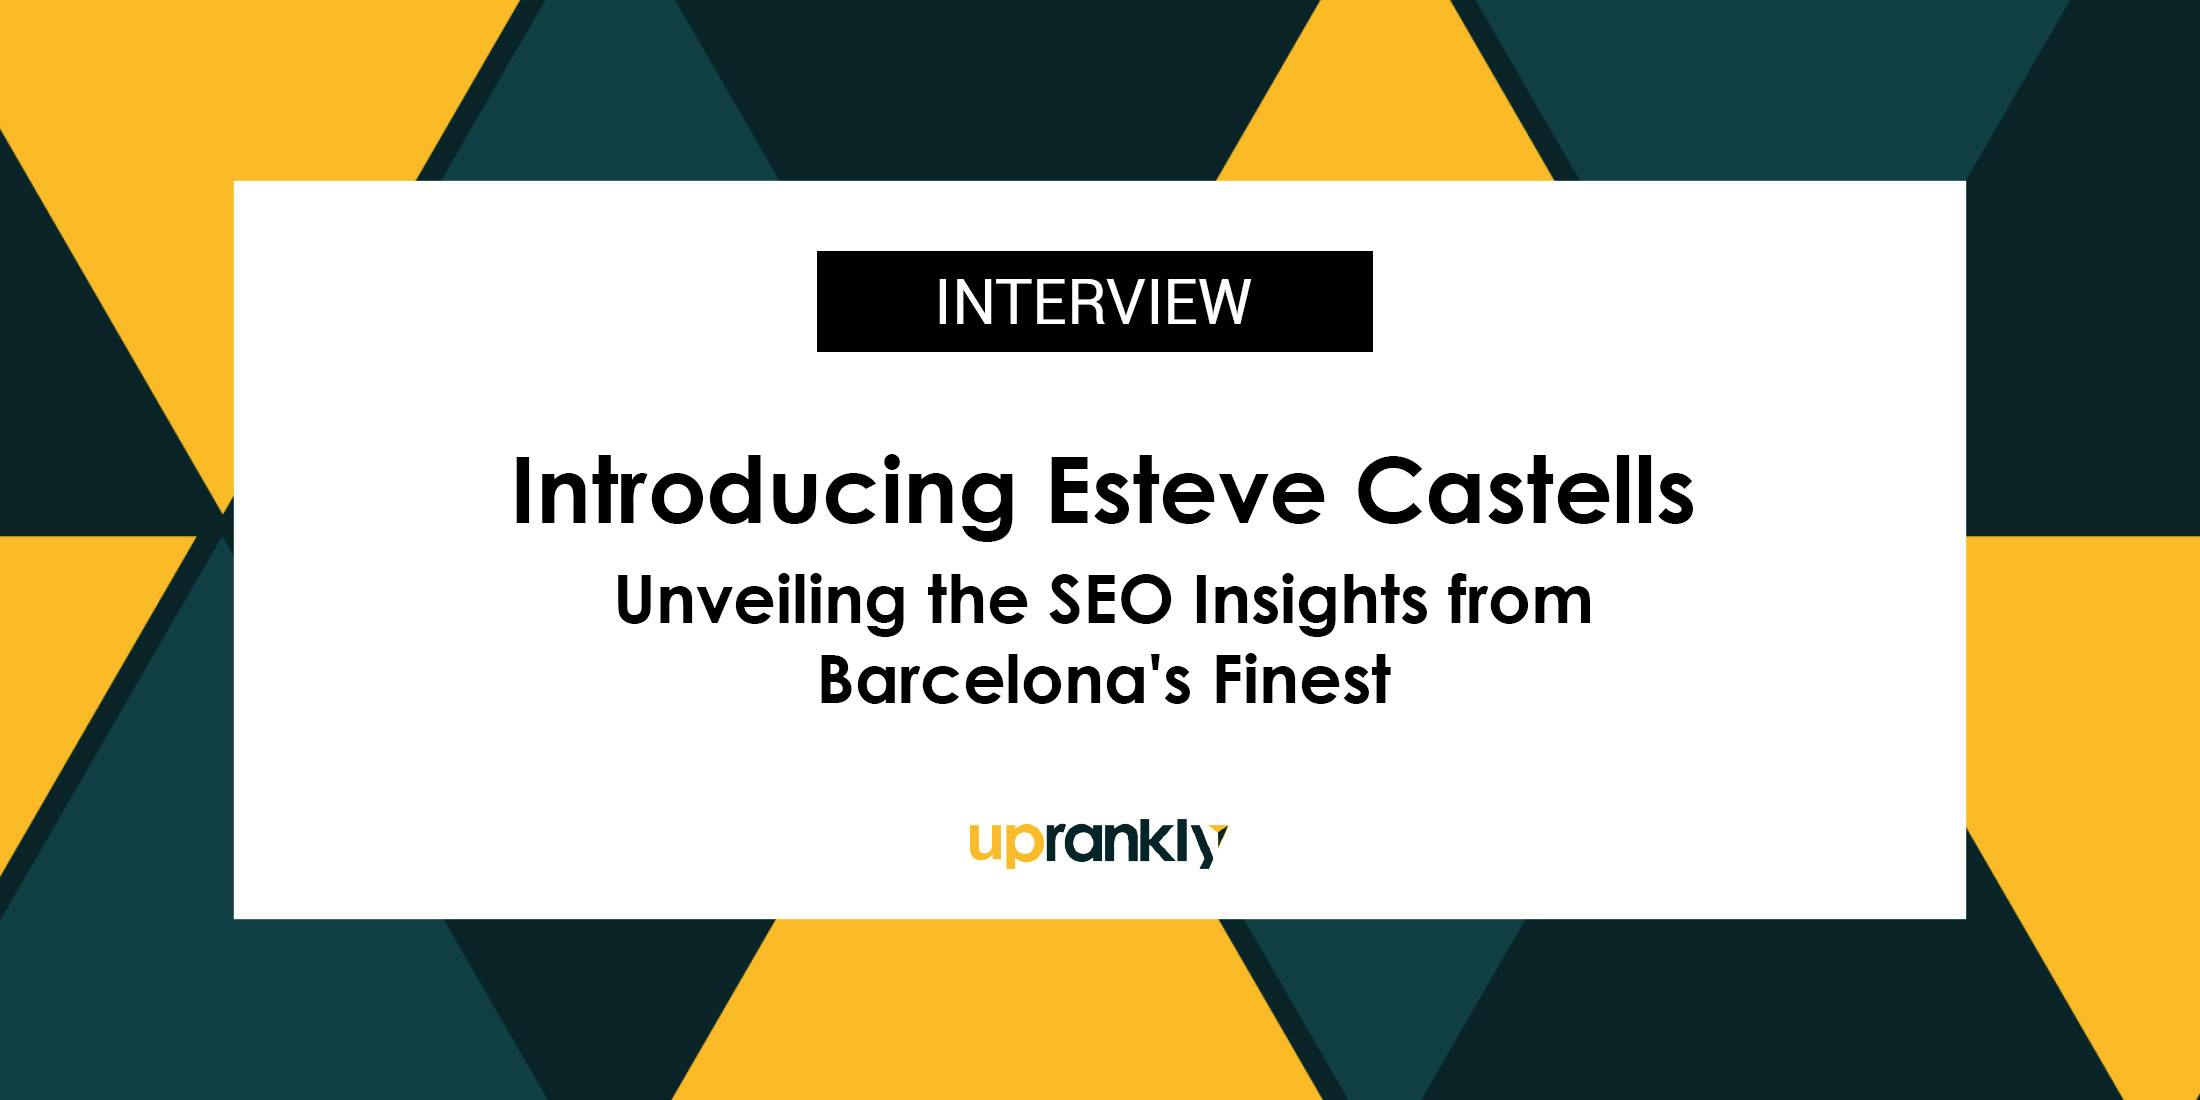 Introducing Esteve Castells: Unveiling the SEO Insights From Barcelona’s Finest